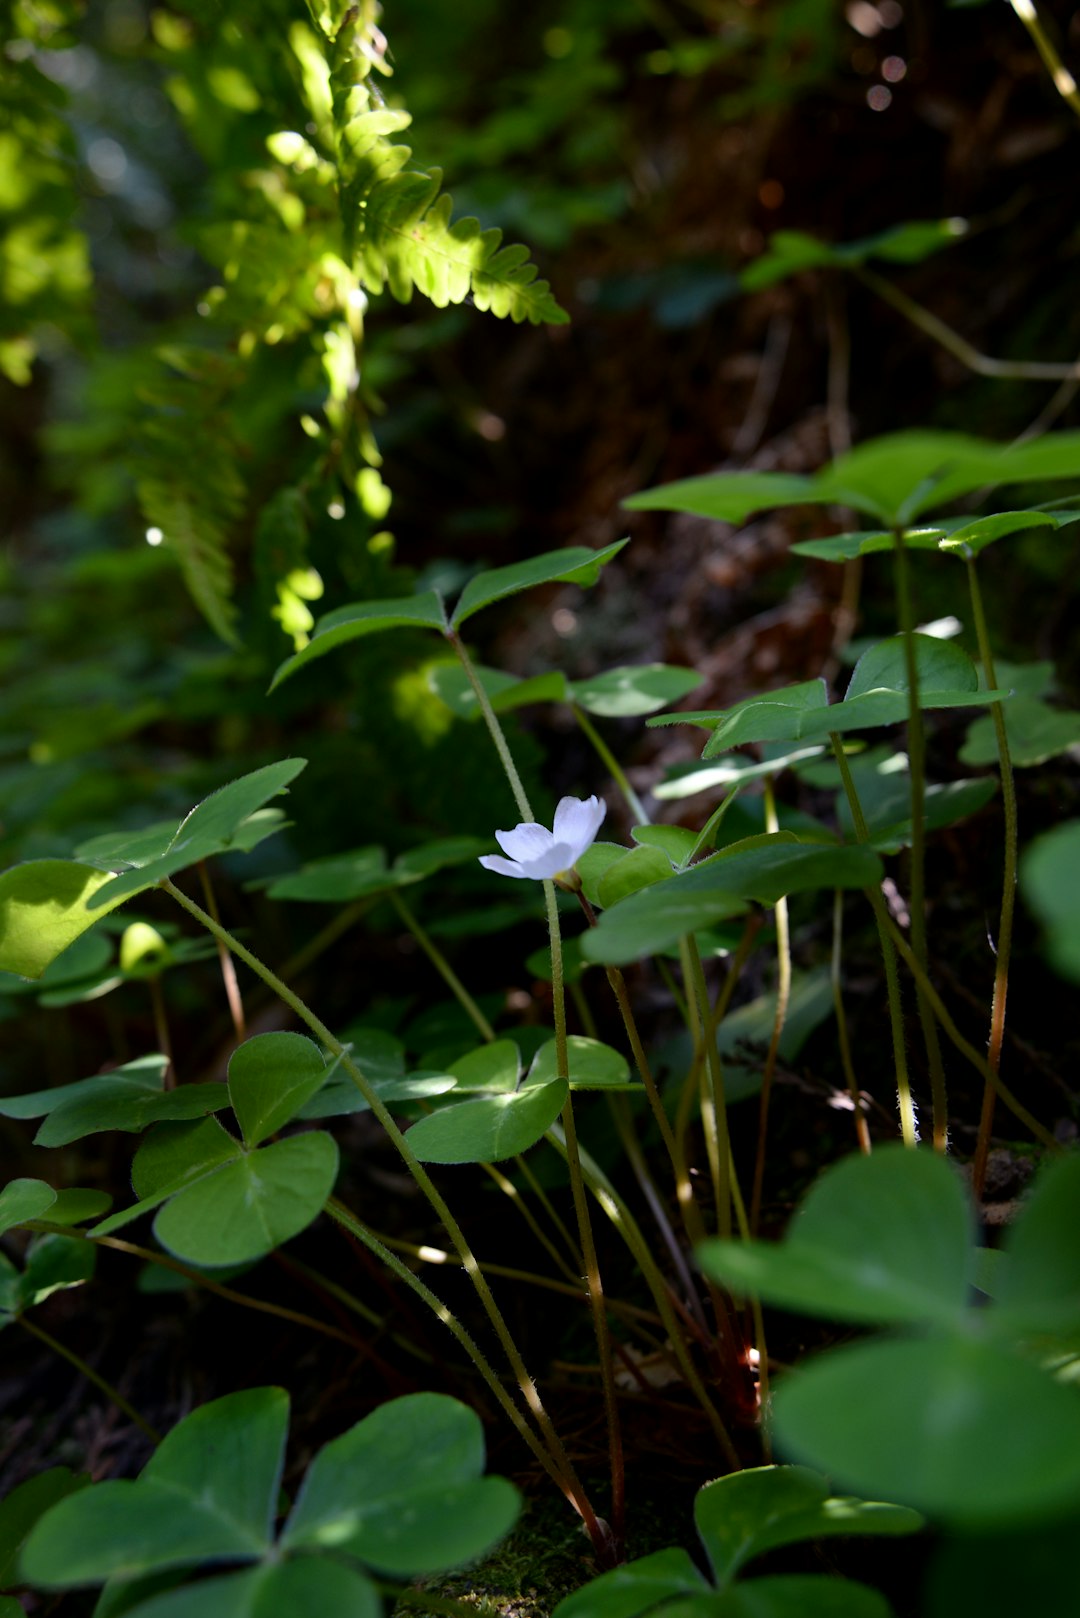 A redwood sorrel plant in Muir Woods, also known as Oxalis oregana. These are native to the coastal redwood and Douglas fir forests of the Pacific Northwest region of North America. The Oxalis are so accustomed to the low light of the forest floor that, when struck by direct sunlight, the leaves fold downward. When shade returns, they reopen. The movement is quick enough to be observable by the human eye.